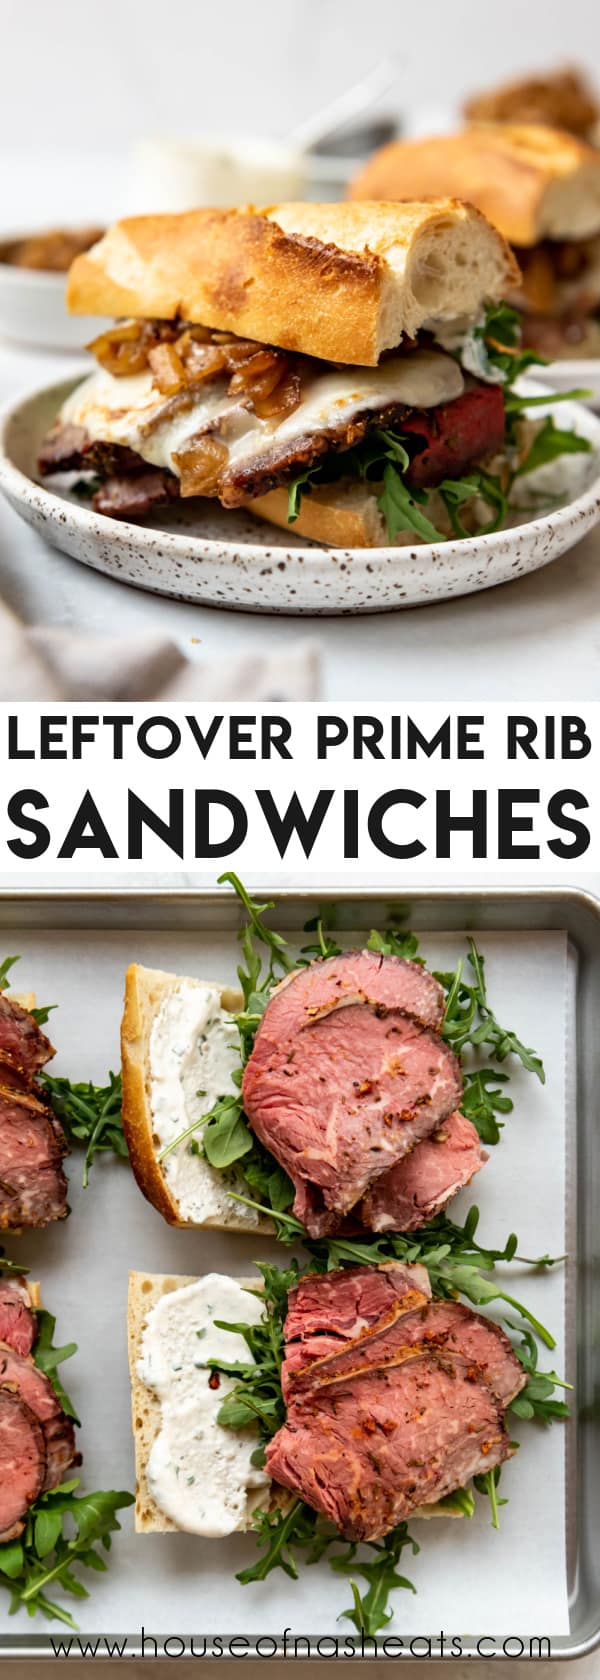 A collage of images of leftover prime rib sandwiches with text overlay.